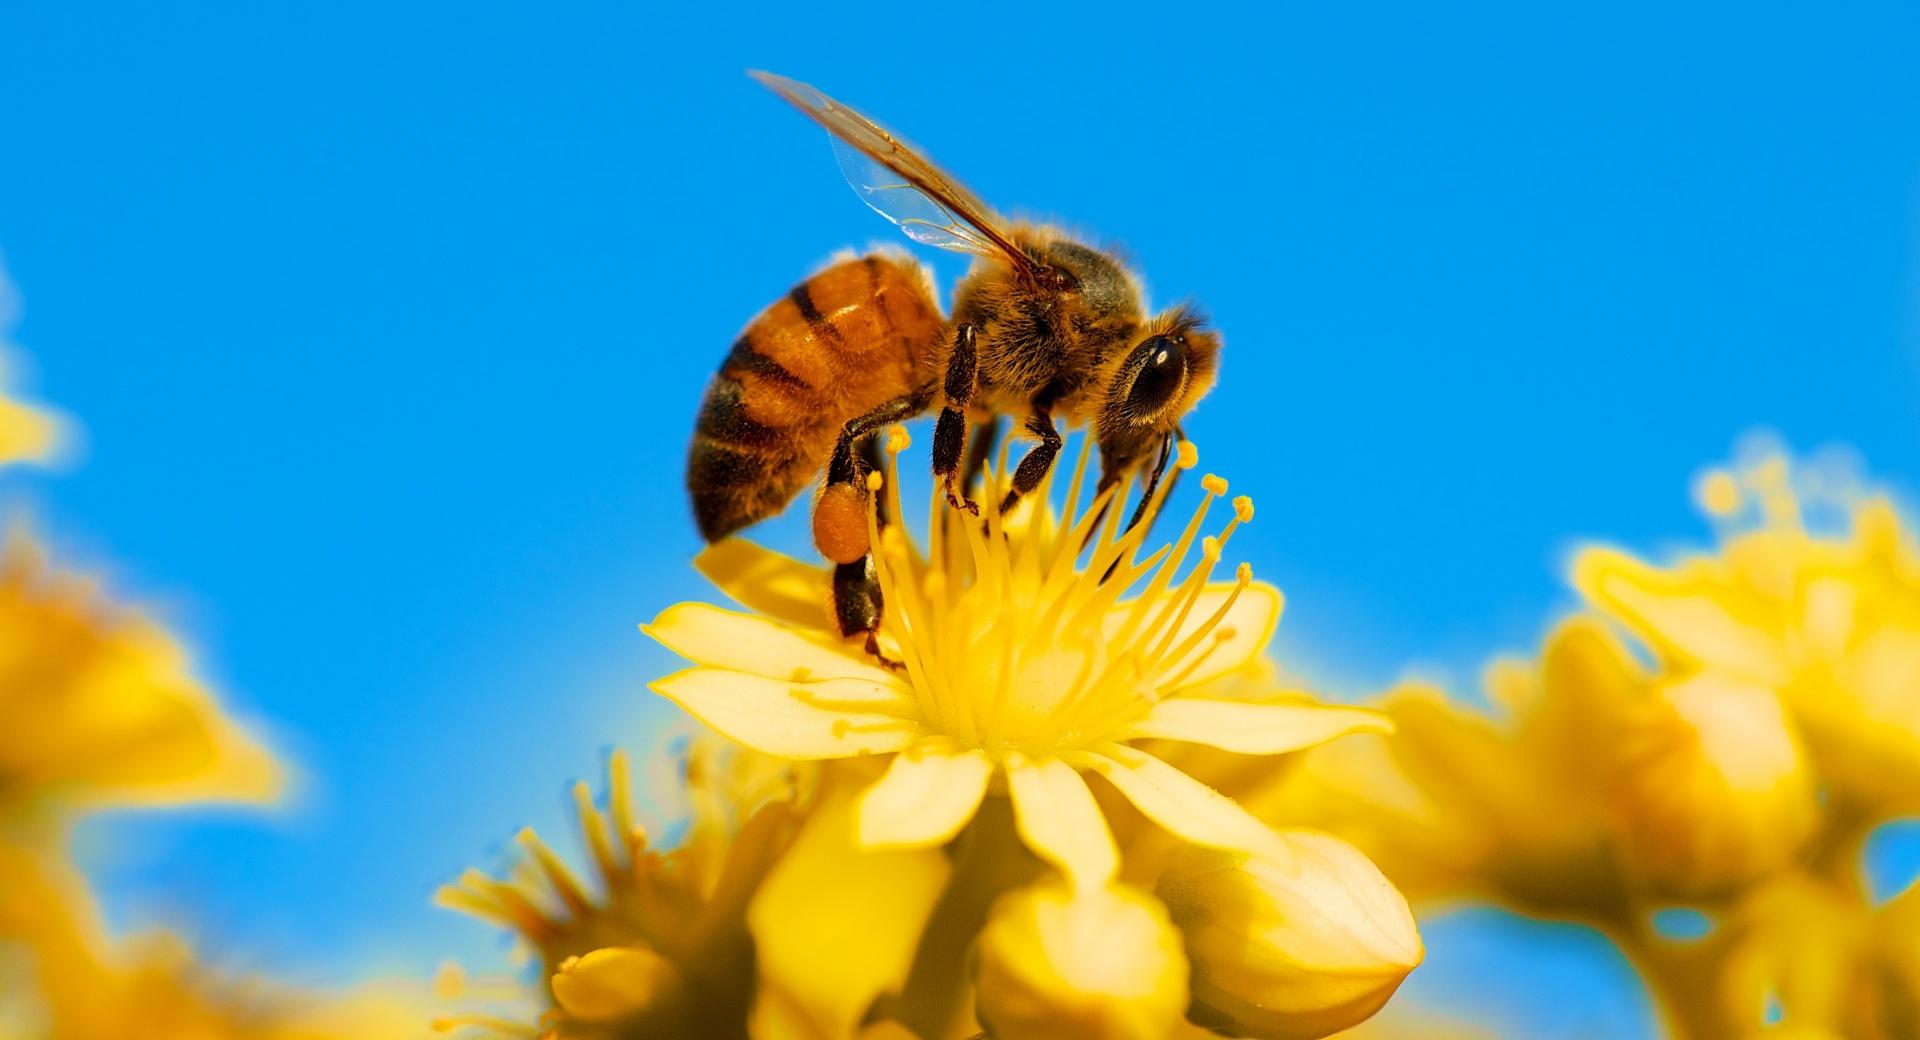 Honey Bee, Yellow Flower, Blue Sky wallpapers HD quality